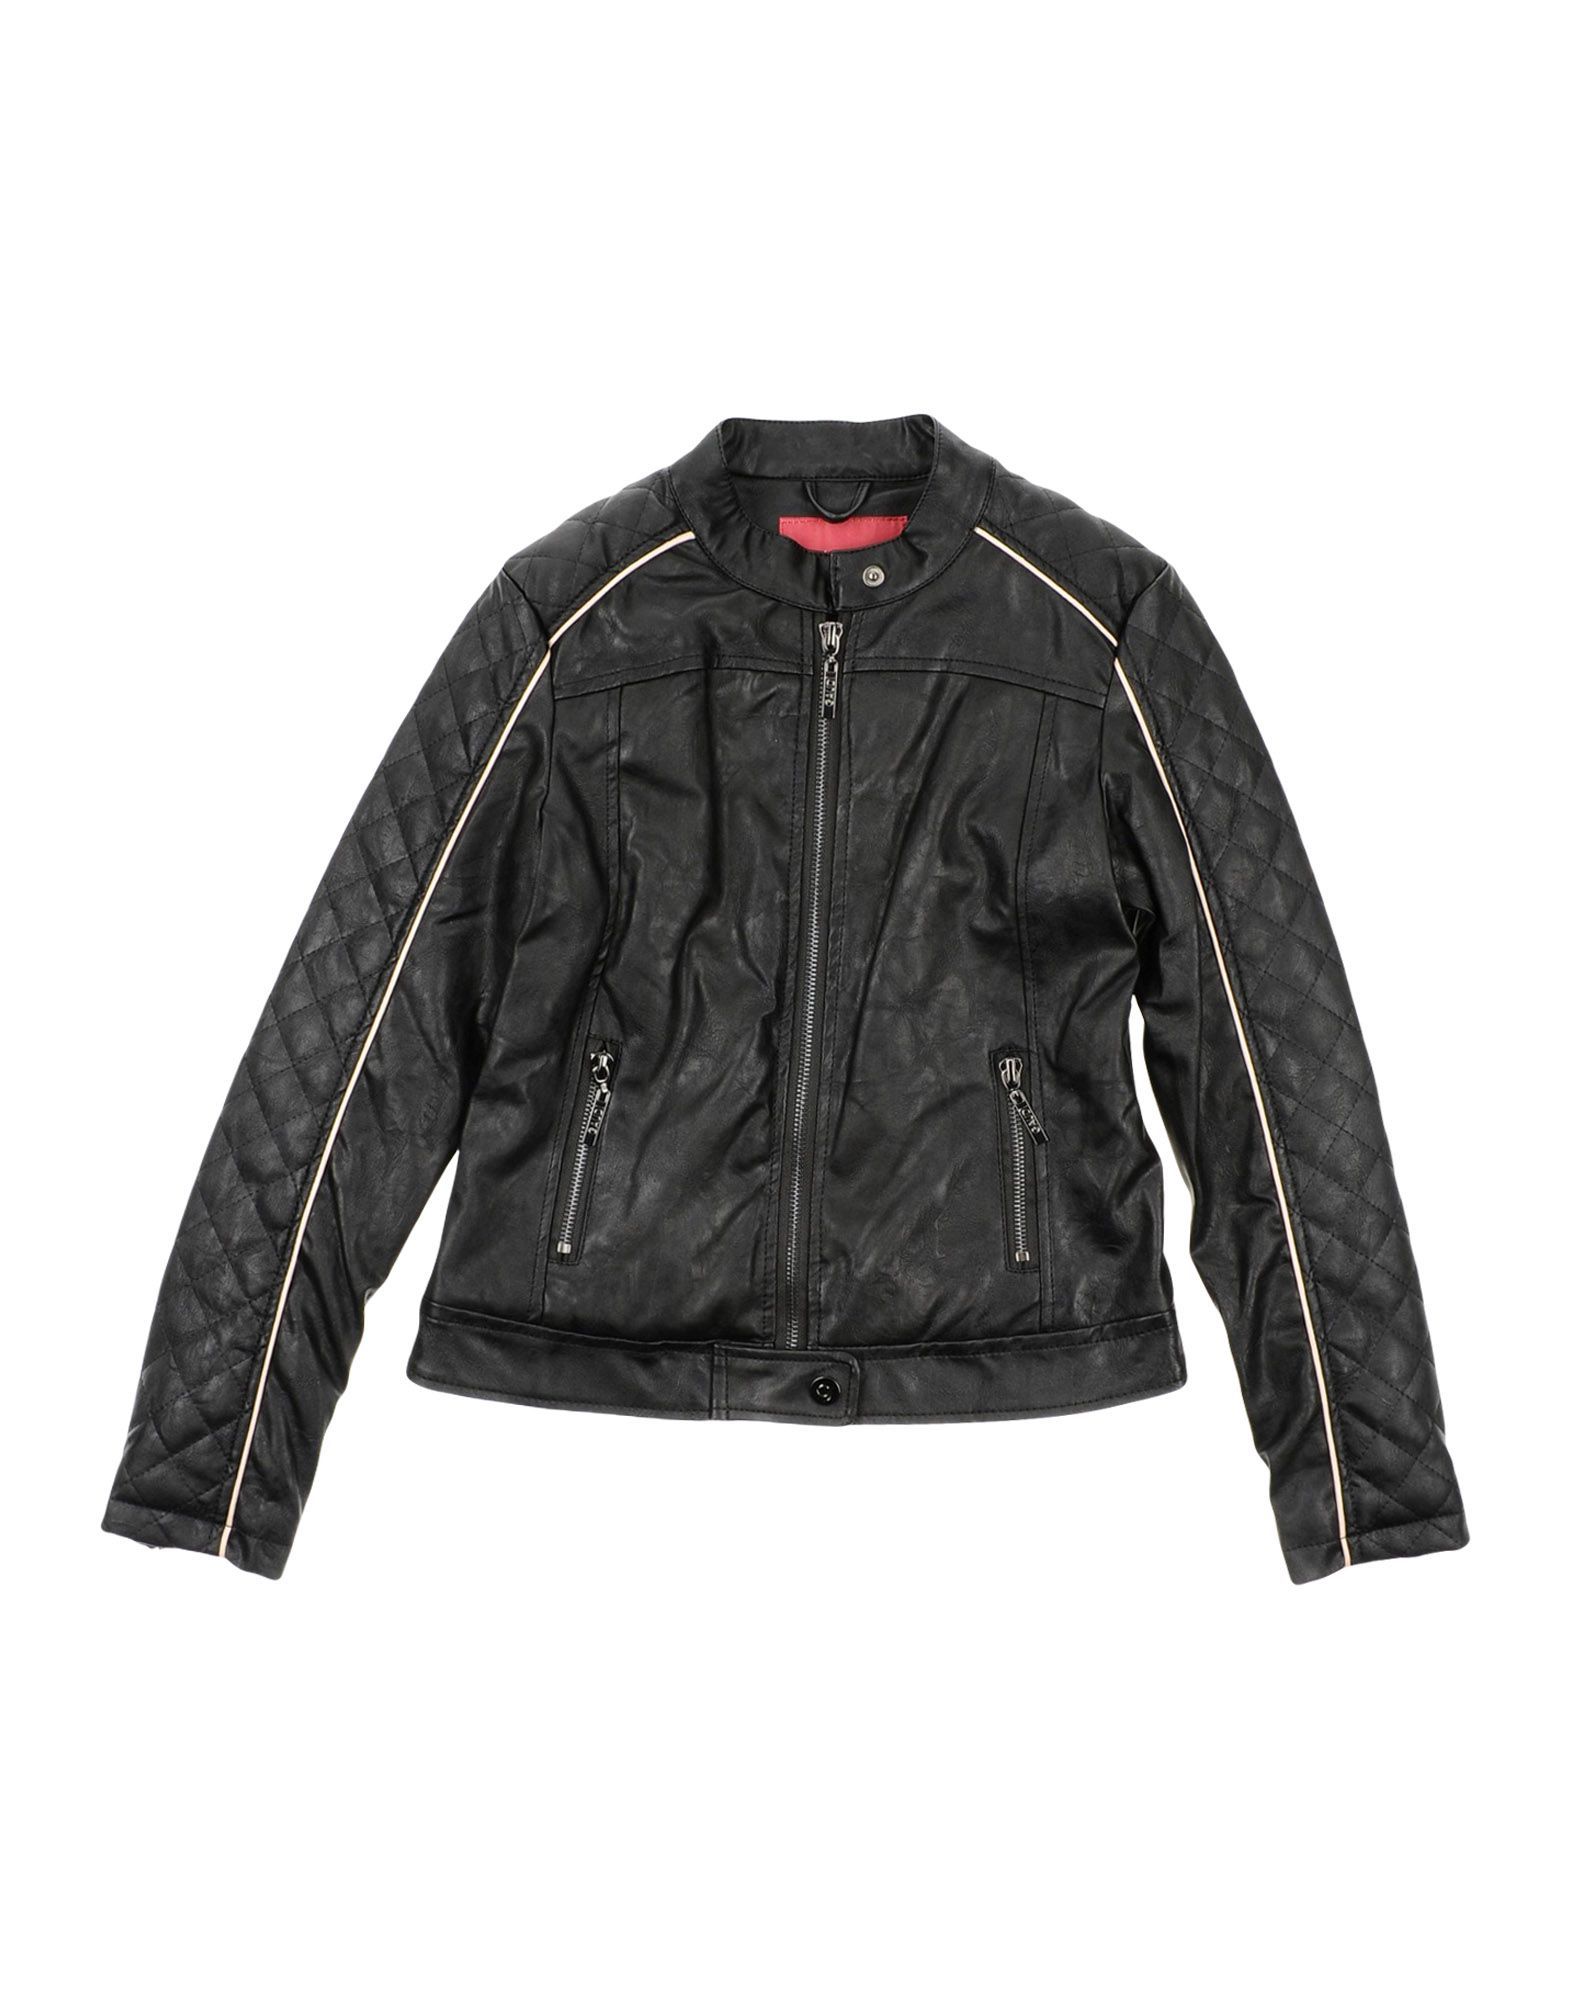 faux leather, quilted, no appliqu�s, solid colour, single-breasted , zip, mandarin collar, multipockets, pocket with zip, long sleeves, zipped cuffs, padded inner, wash at 30� c, do not dry clean, do not iron, do not bleach, do not tumble dry, biker style, small sized